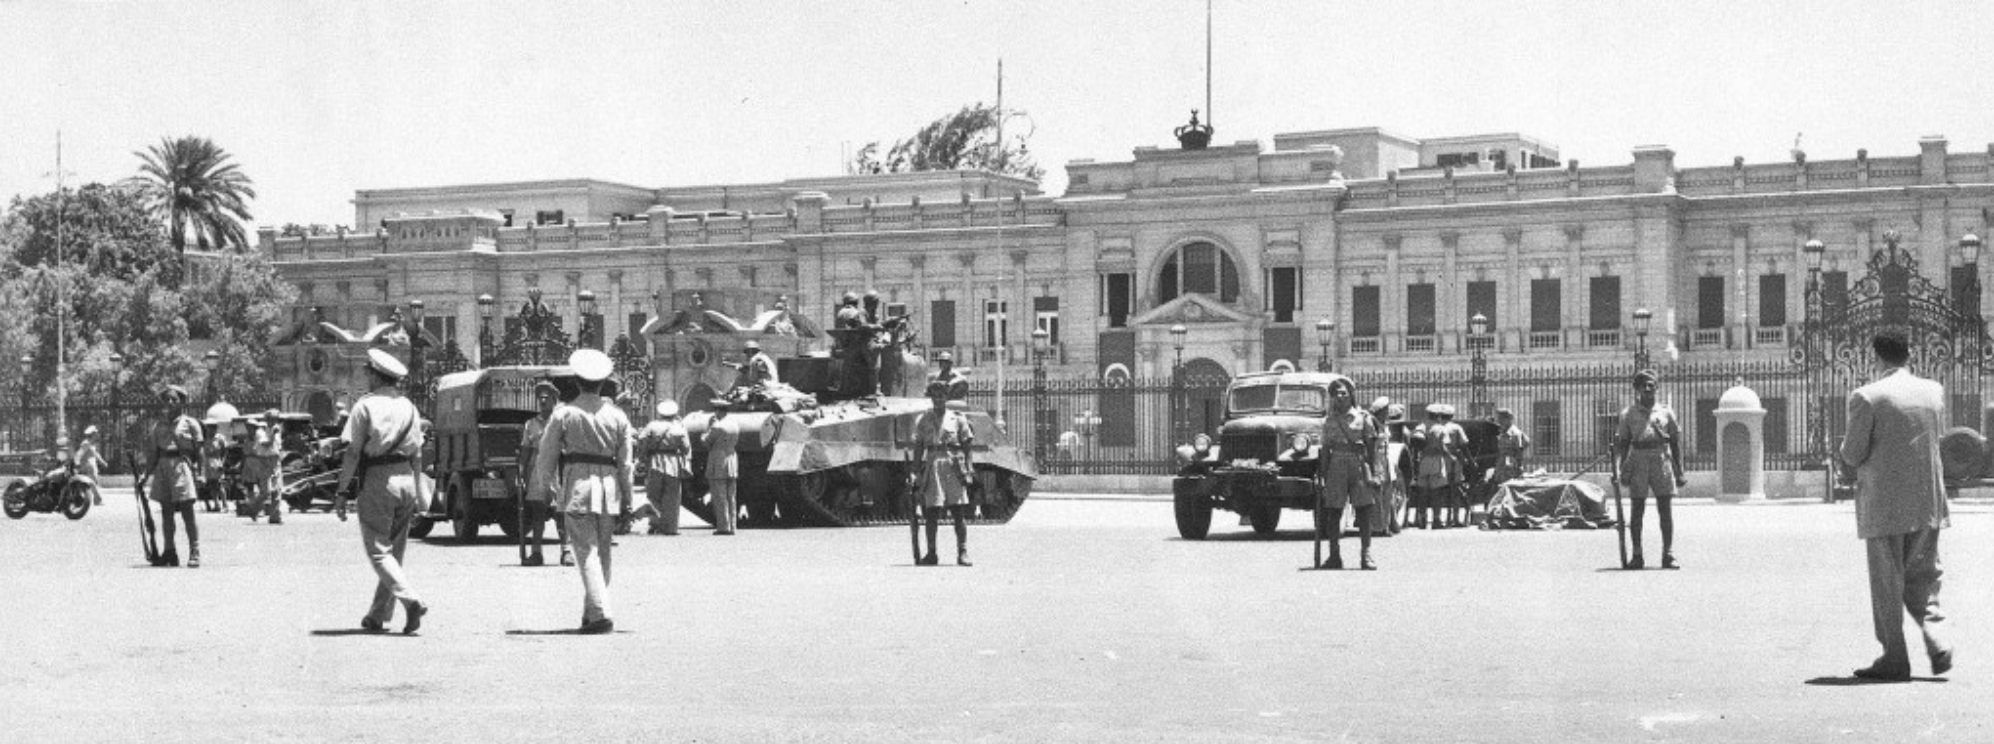 July 26, 1952, An Egyptian army tank and field guns are drawn up in front of the Abdin Palace in Cairo. Inside the palace, King Farouk agrees to abdicate in favor of his 7-month-old son, Prince Fuad.